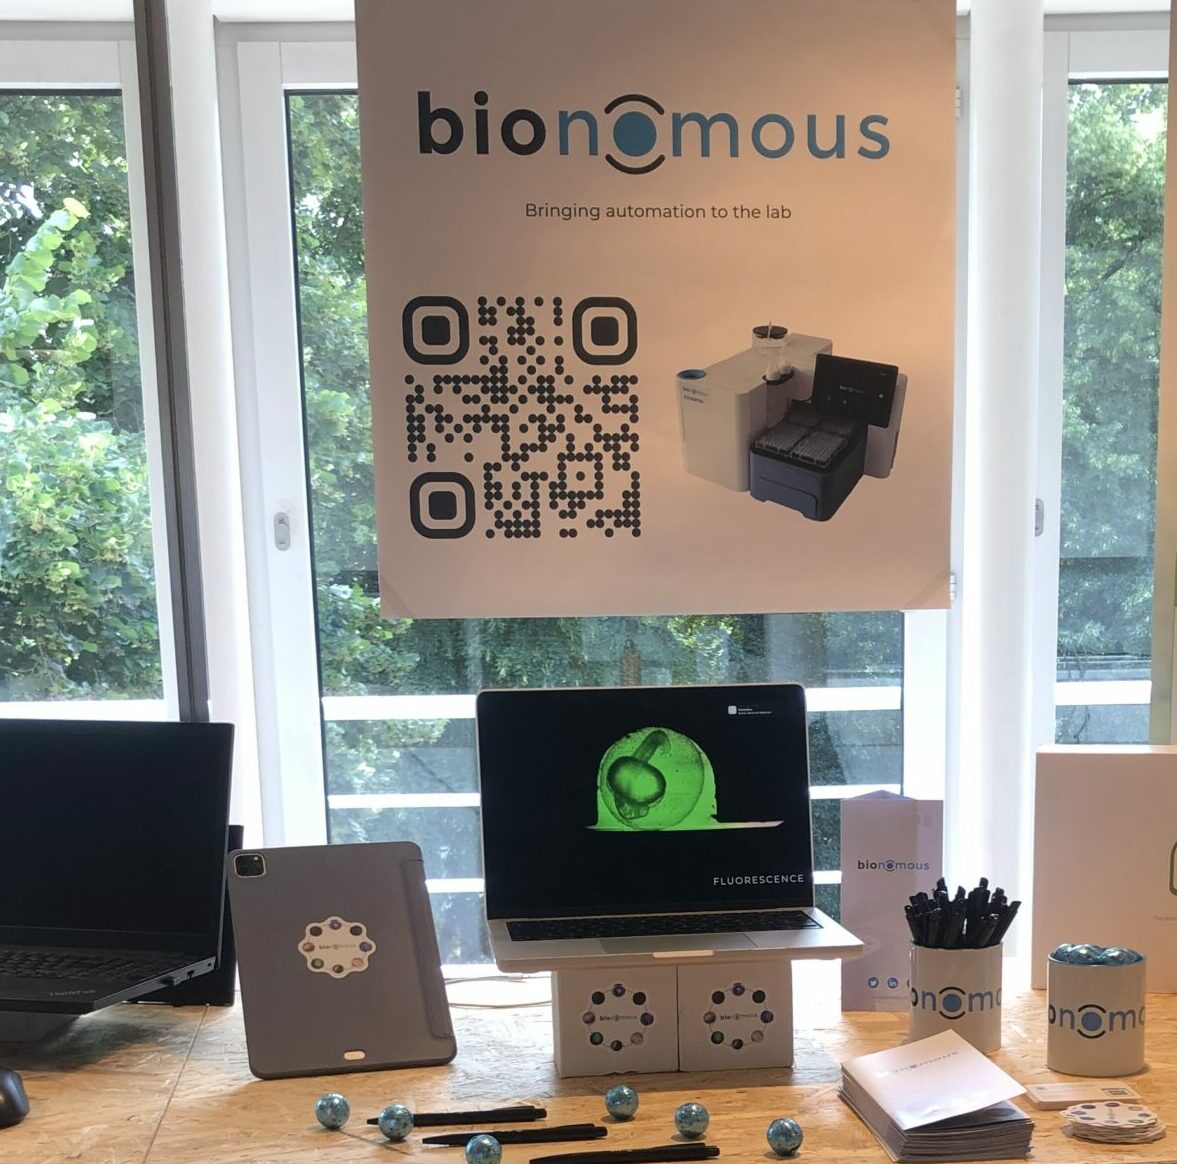 Bionomous won the startup pitching competition at Future Labs Live 2022